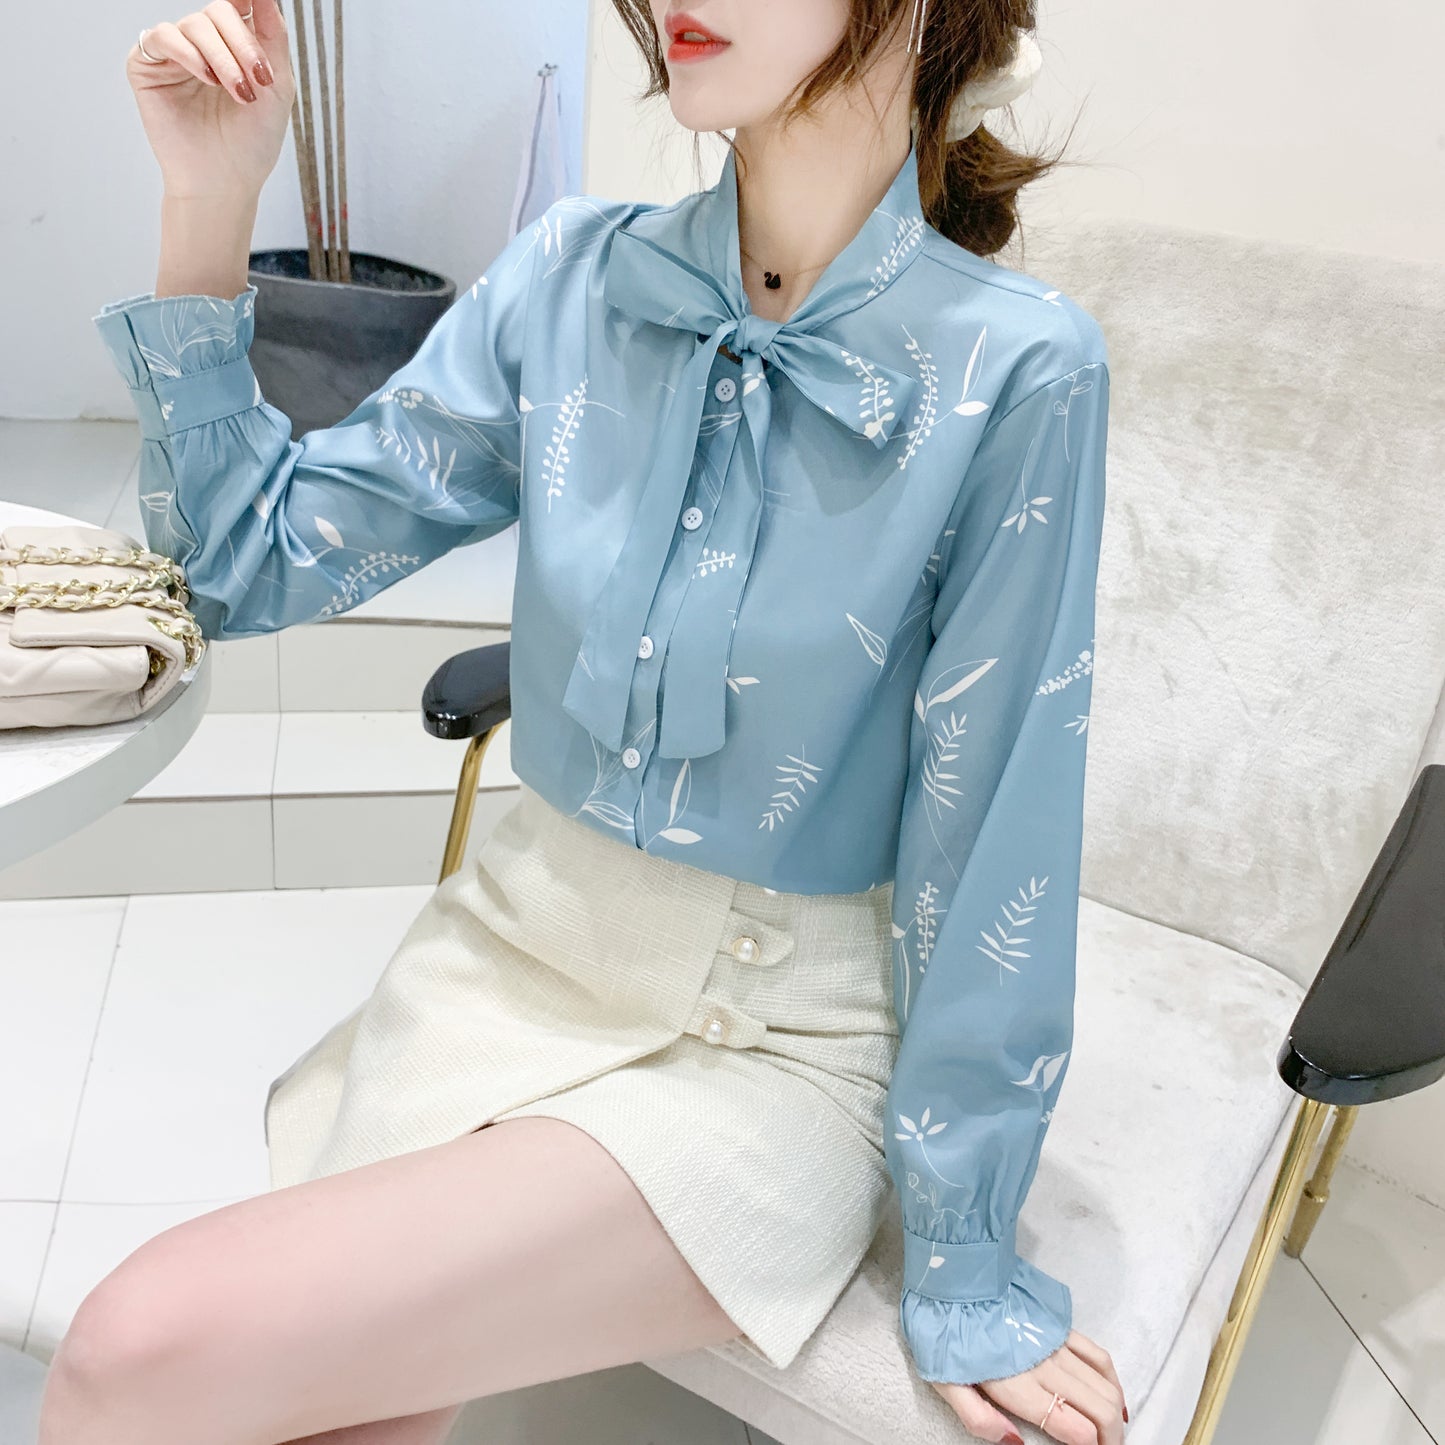 Pattern Bow Tie Long Sleeve Button up Shirt Blouse